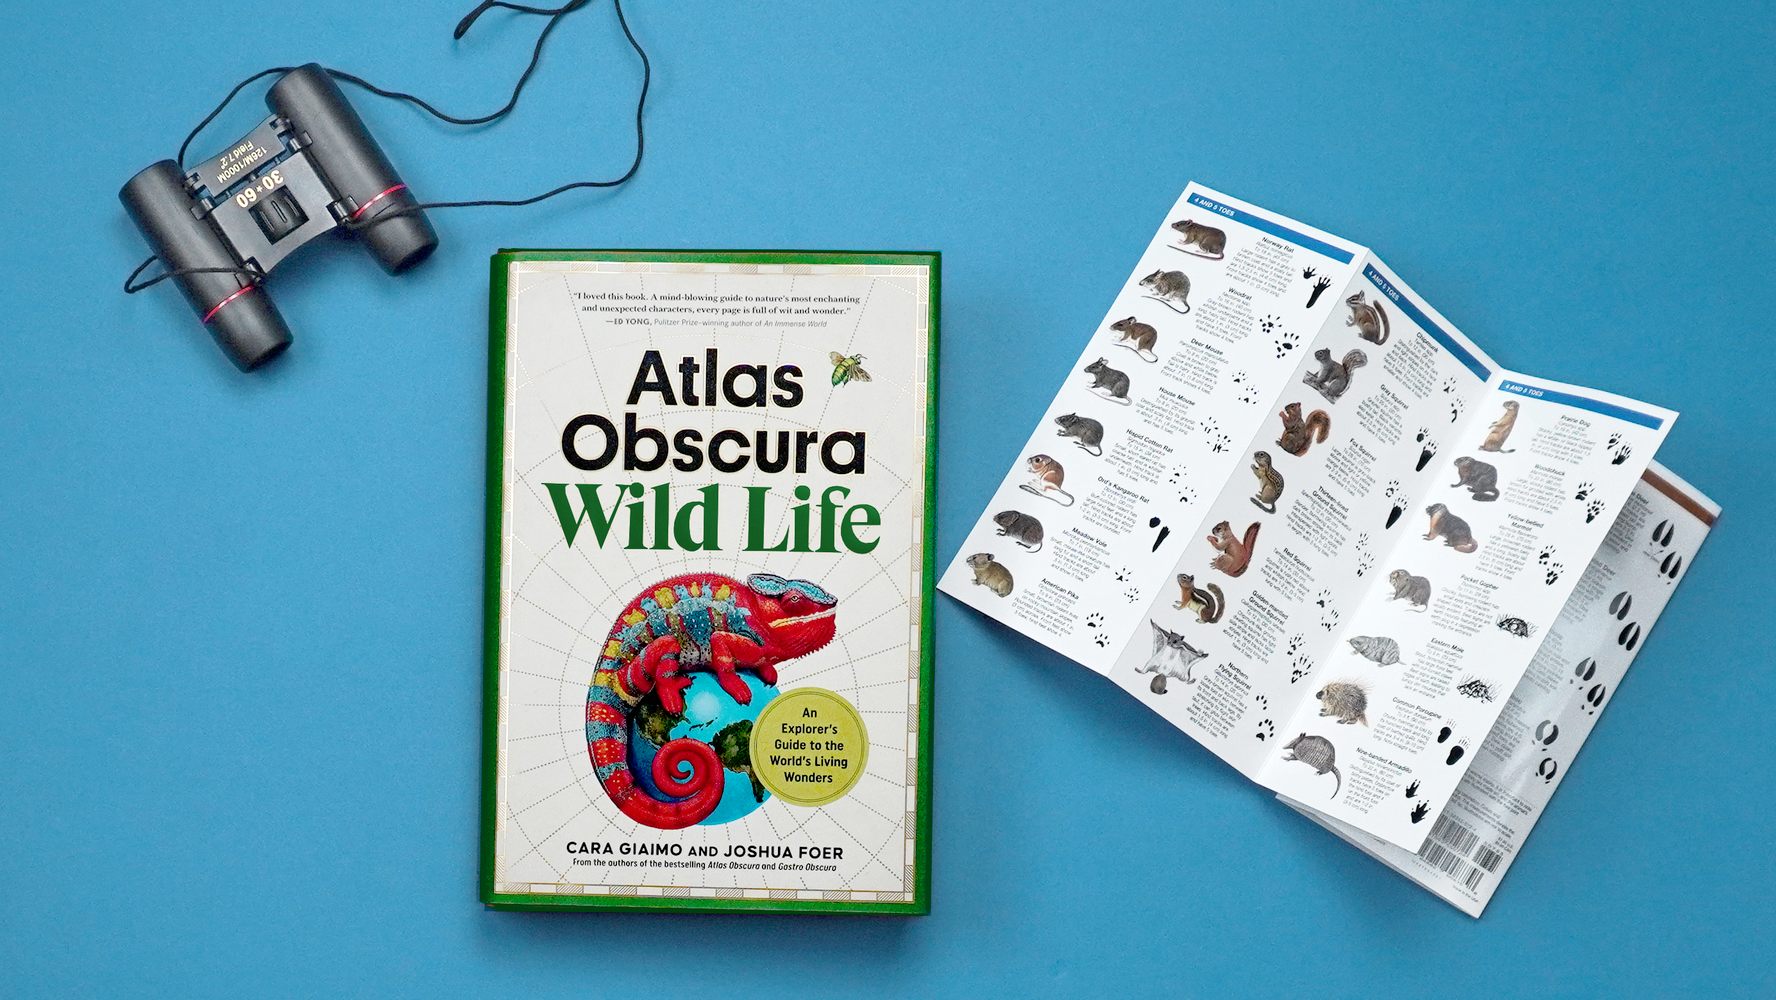 The Wild Life book lays on a bright blue surface next to a pair of binoculars and a foldable field guide for small critters.